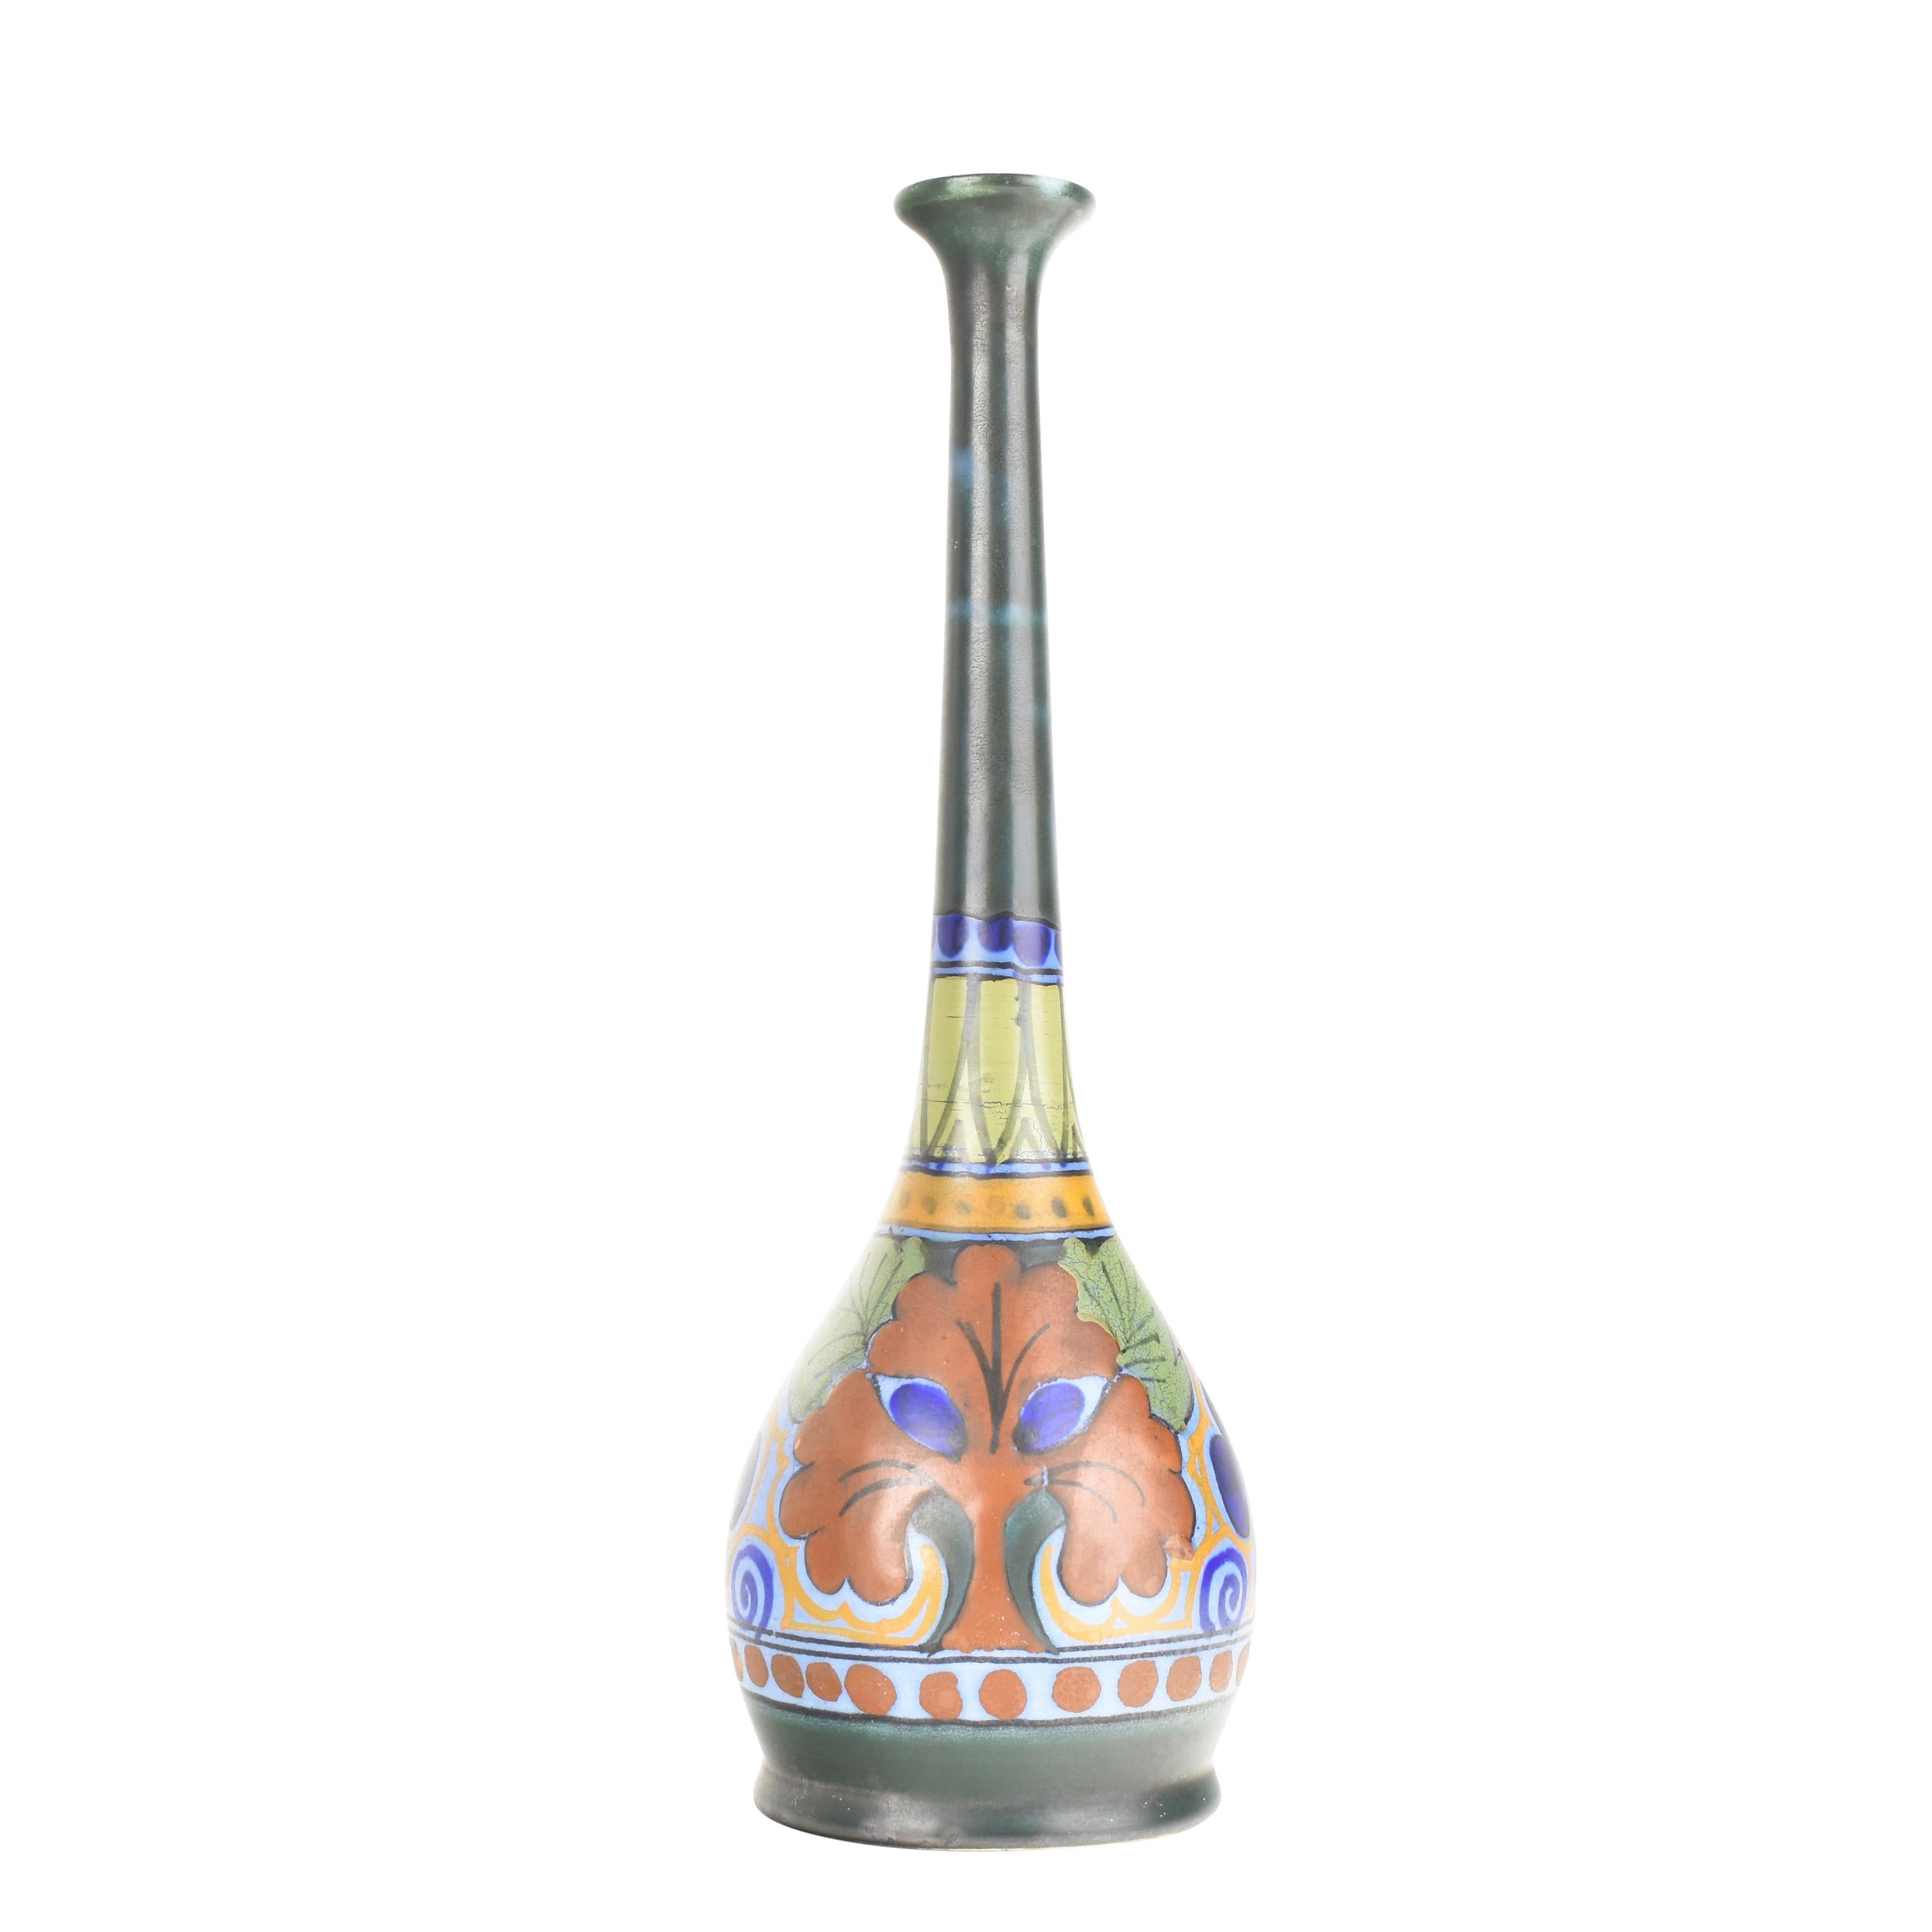 Antique Gouda Soliflor Stem Vase - Art Nouveau Elegance from the Netherlands

This soliflor stem vase, crafted from hand-painted, matte-glazed ceramic, is an example of ceramic art from the Art Nouveau period in the Netherlands around 1910. It